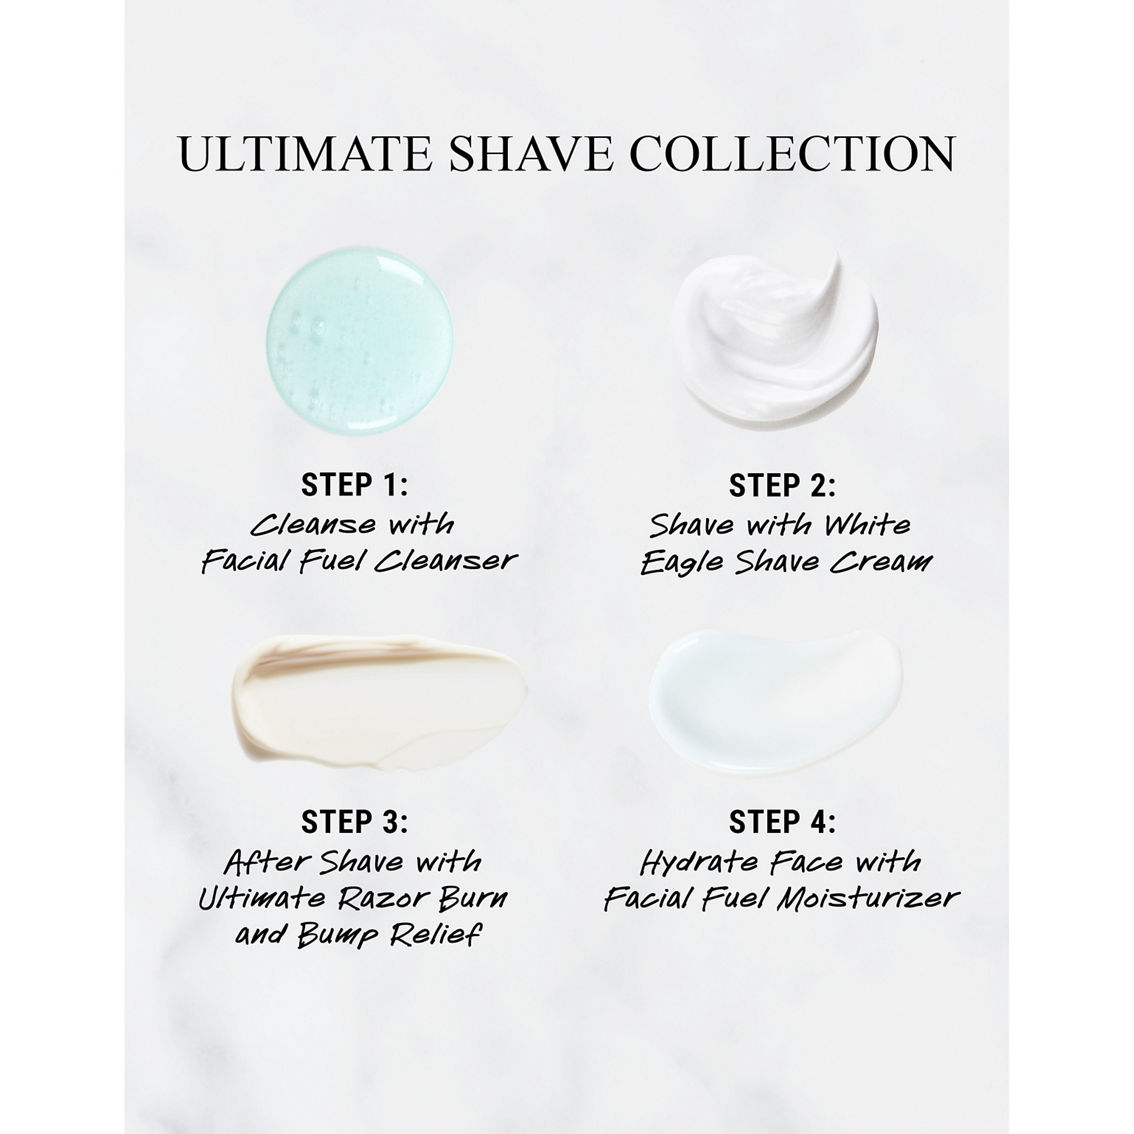 Kiehl's Ultimate Shave Collection 4 pc. Gift Set - Image 3 of 3